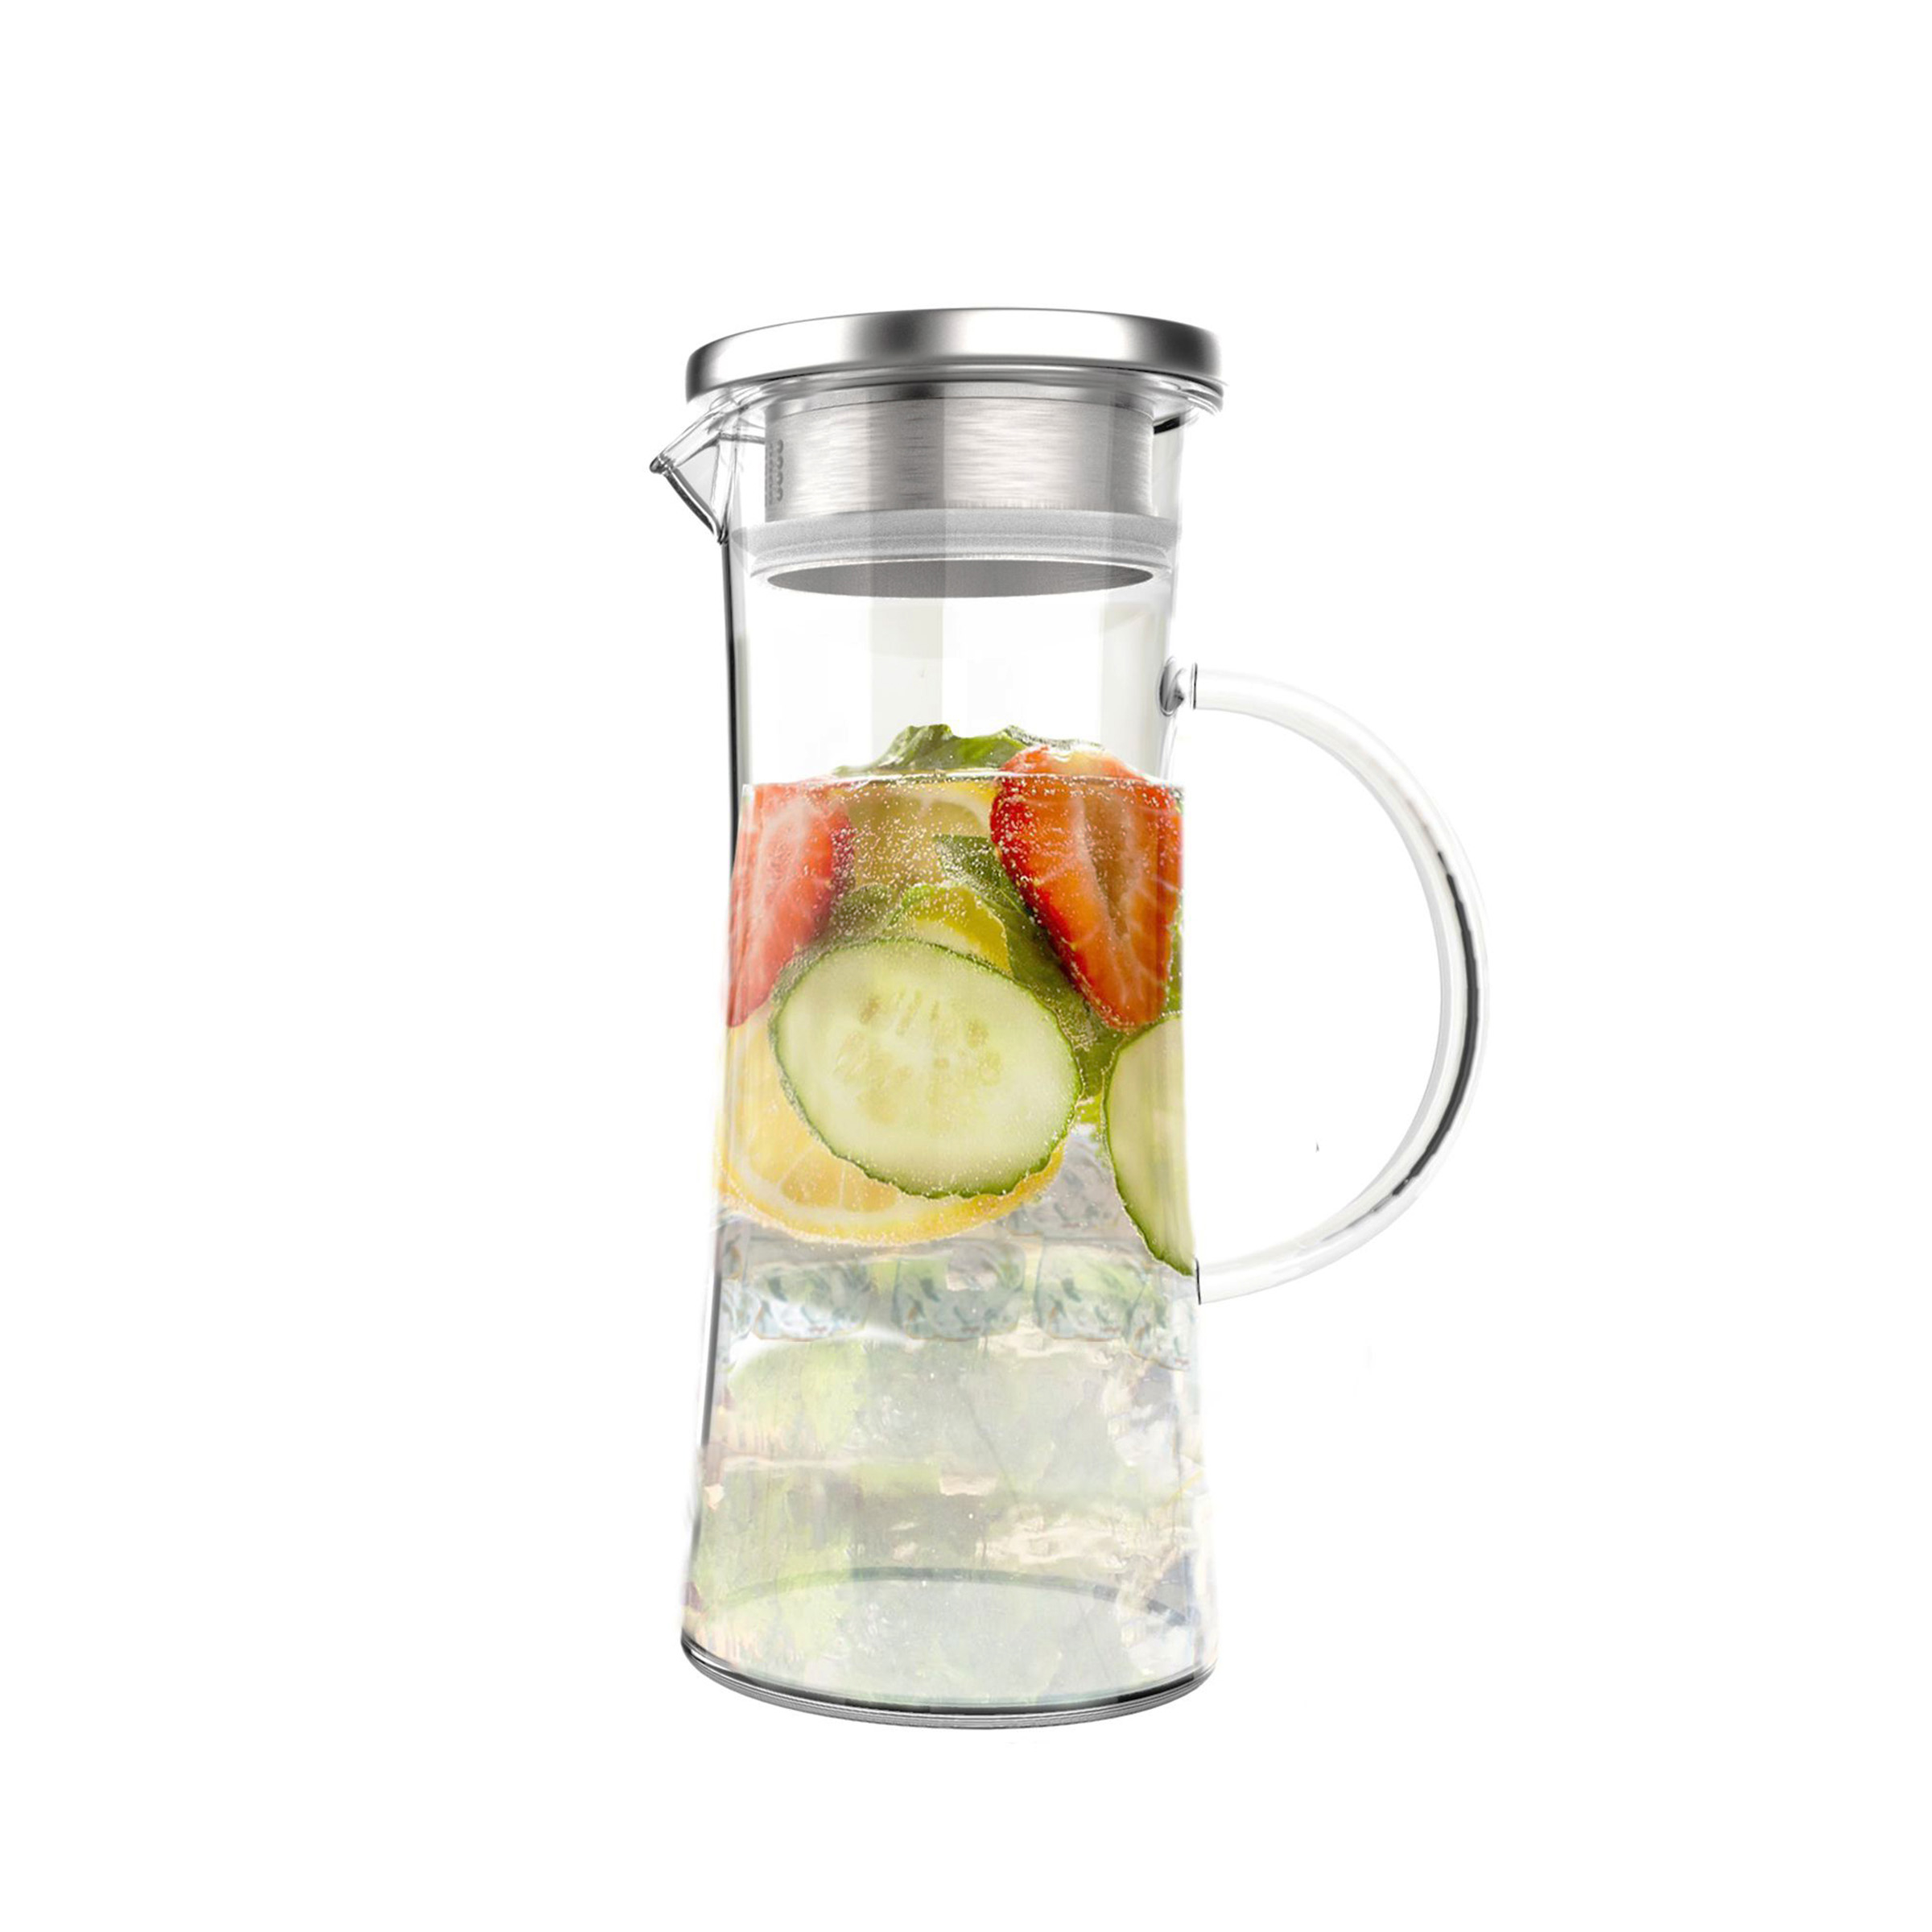 Glass Pitcher-50oz. Carafe with Stainless Steel Filter Lid- Heat Resistant to 300F